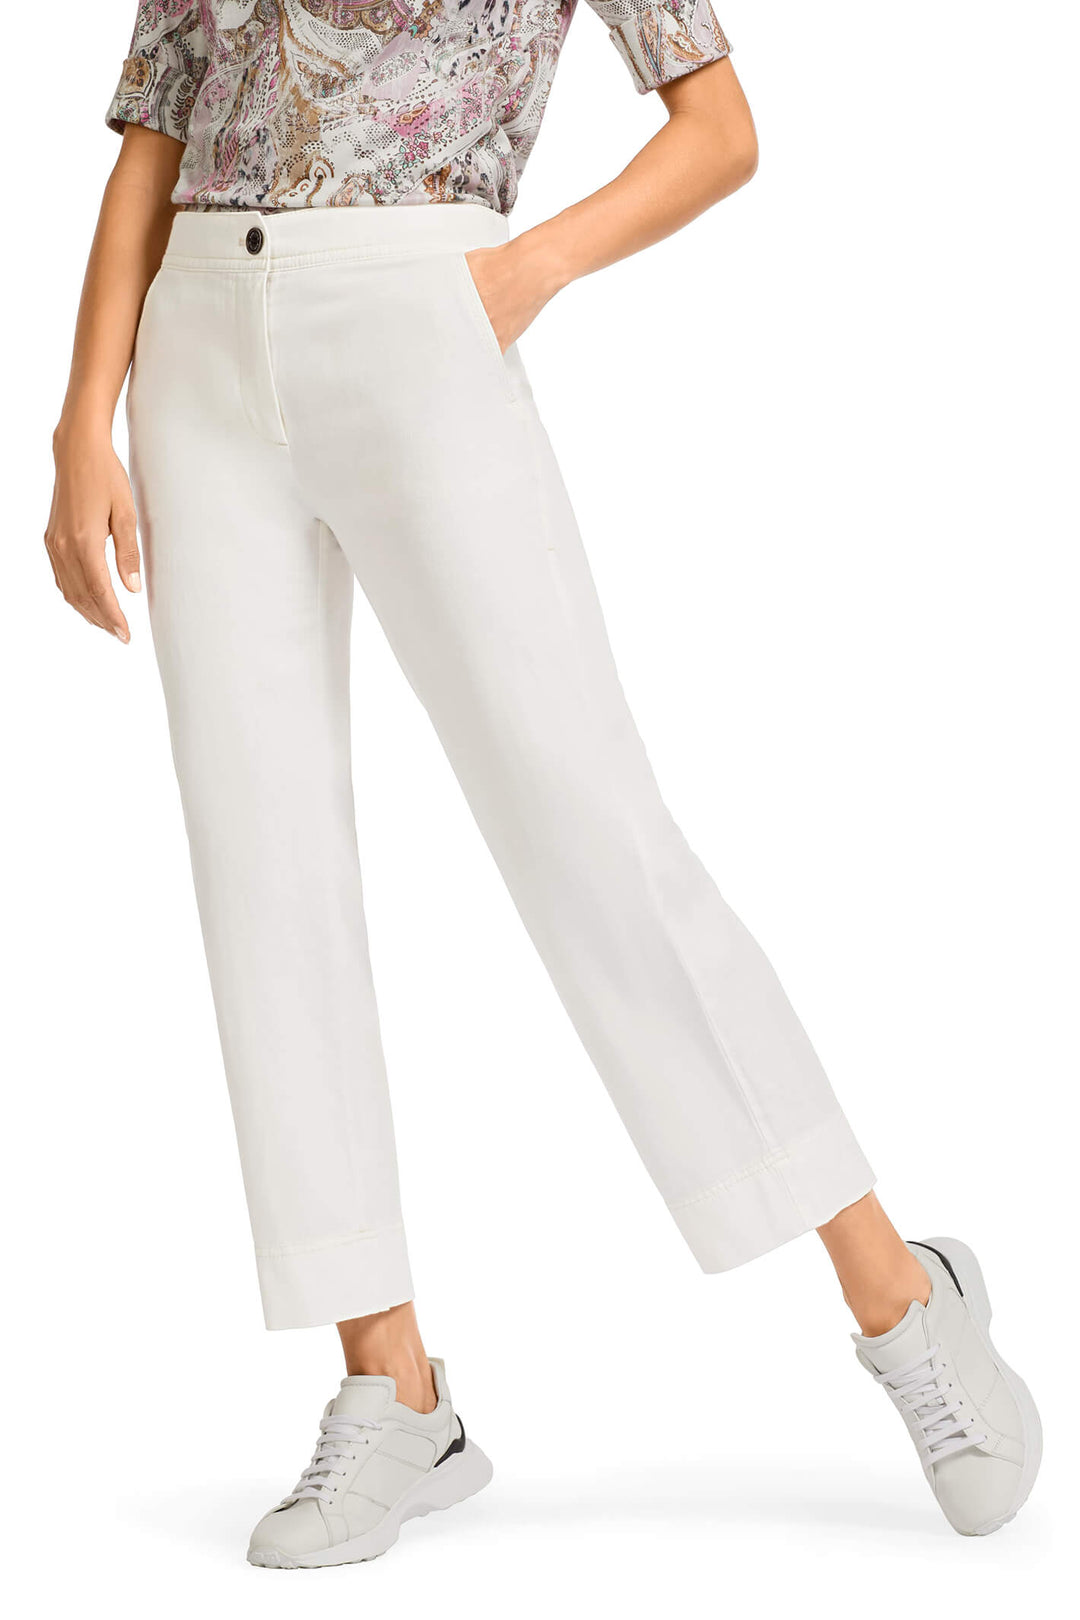 Marc Cain Sports US 81.13 W51 Off White Trousers - Olivia Grace Fashion